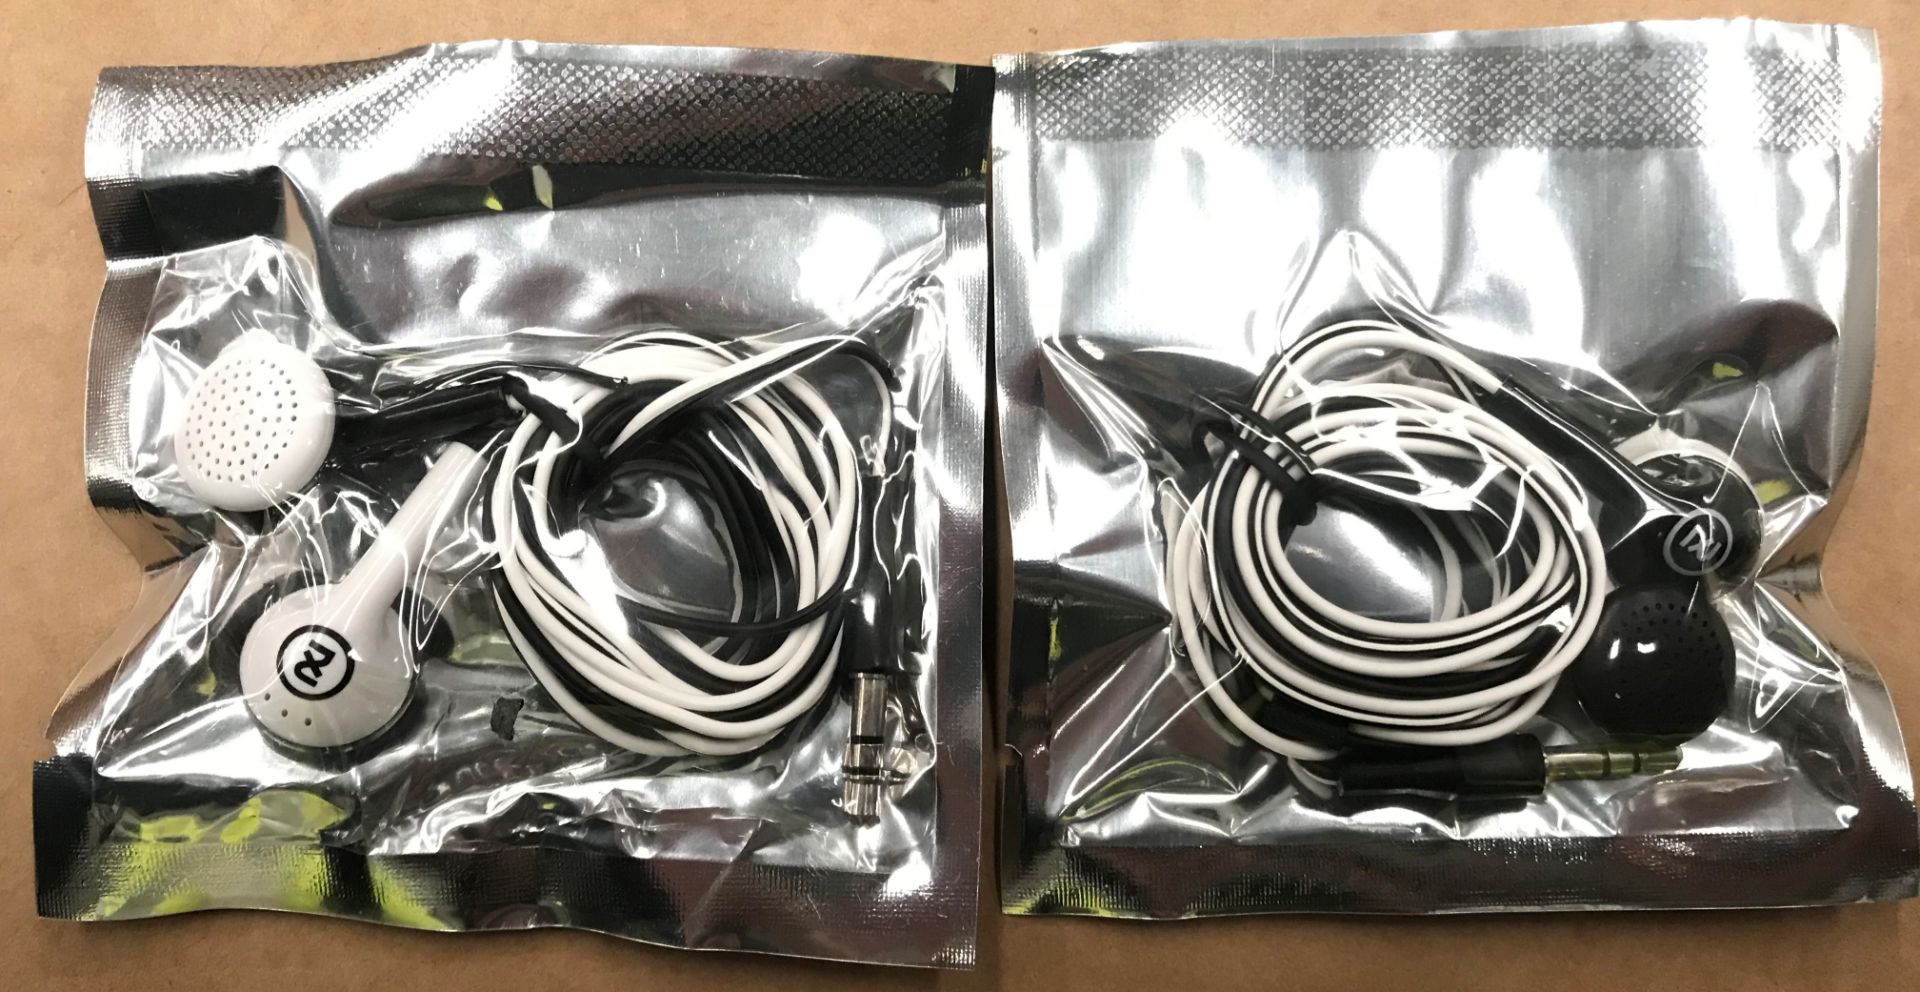 100 x 2XL Offset Earbuds/headphones by Skullcandy (4 inner bags) - black and white